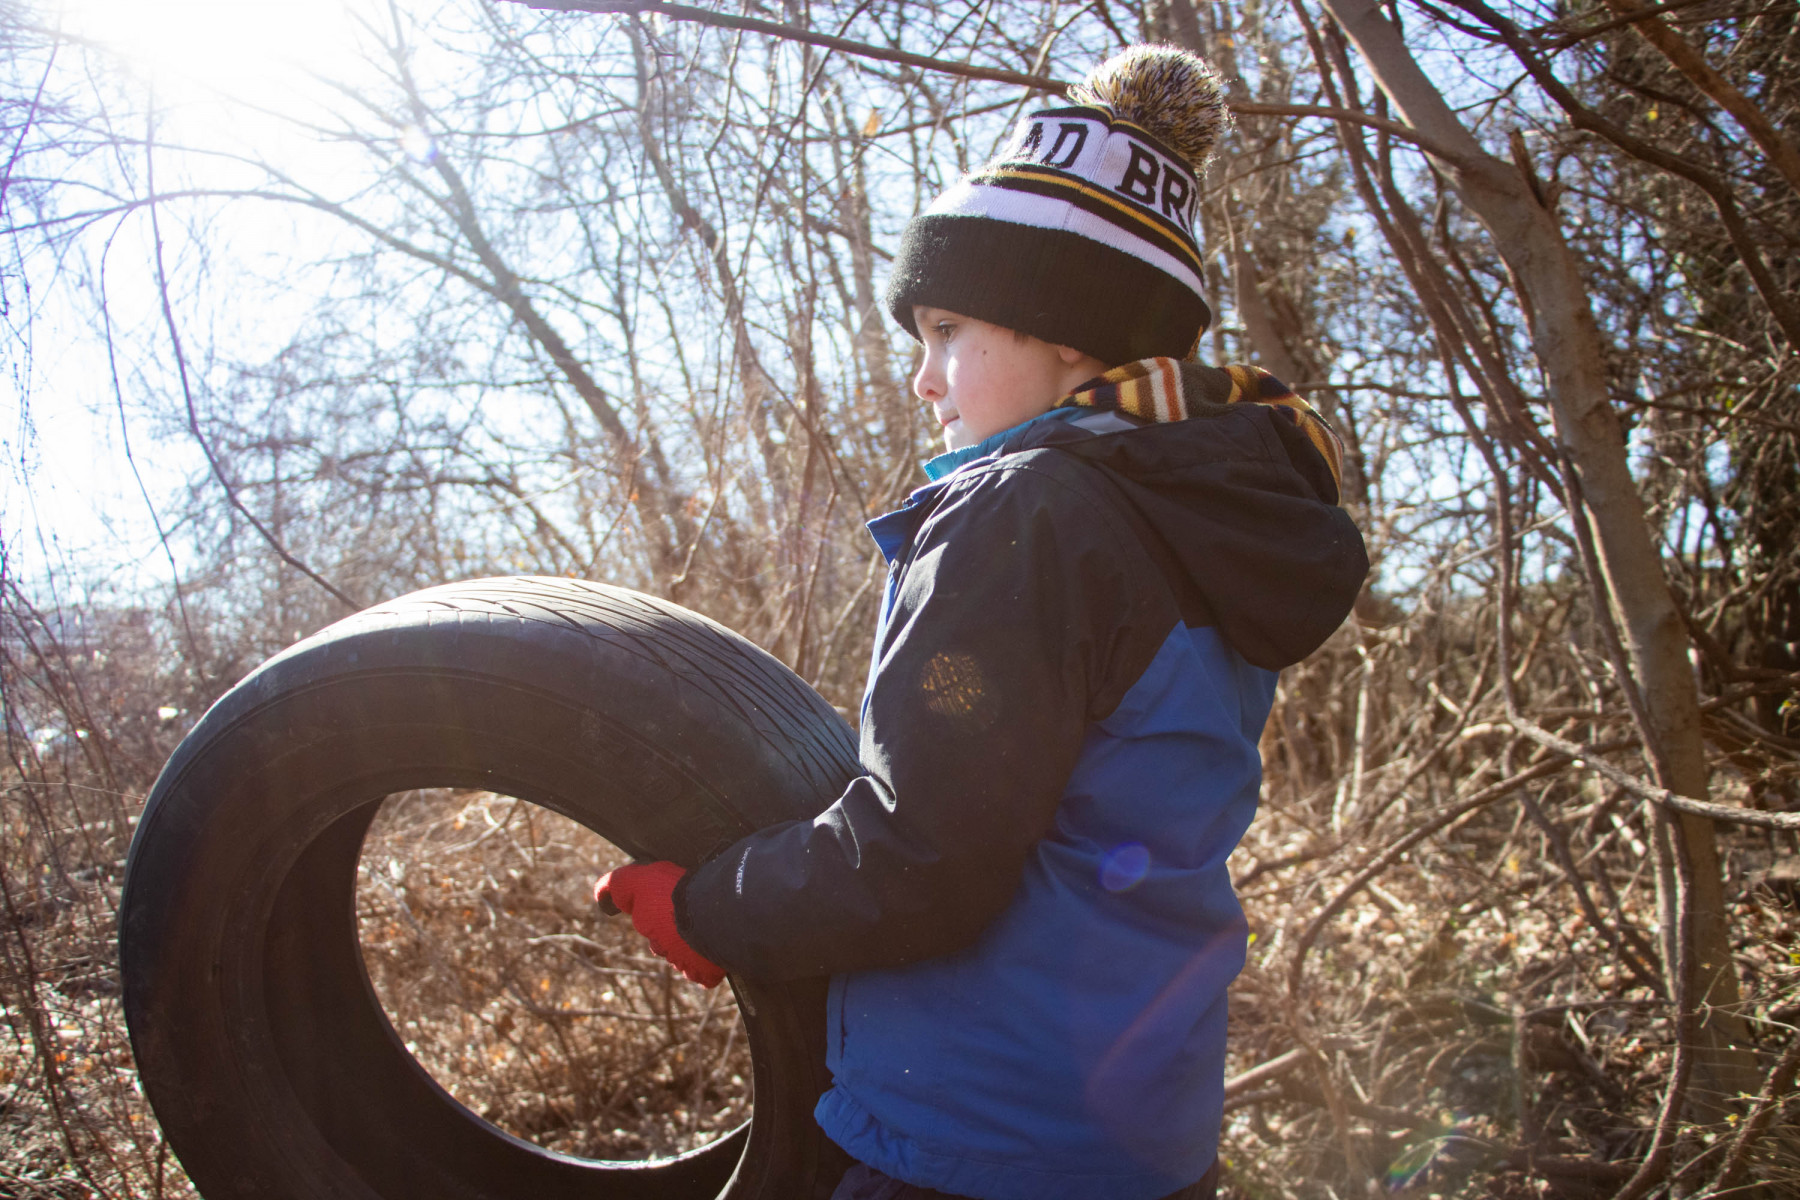 A young child in winter coat, hat, and gloves carries a car tire amidst a wooded background.